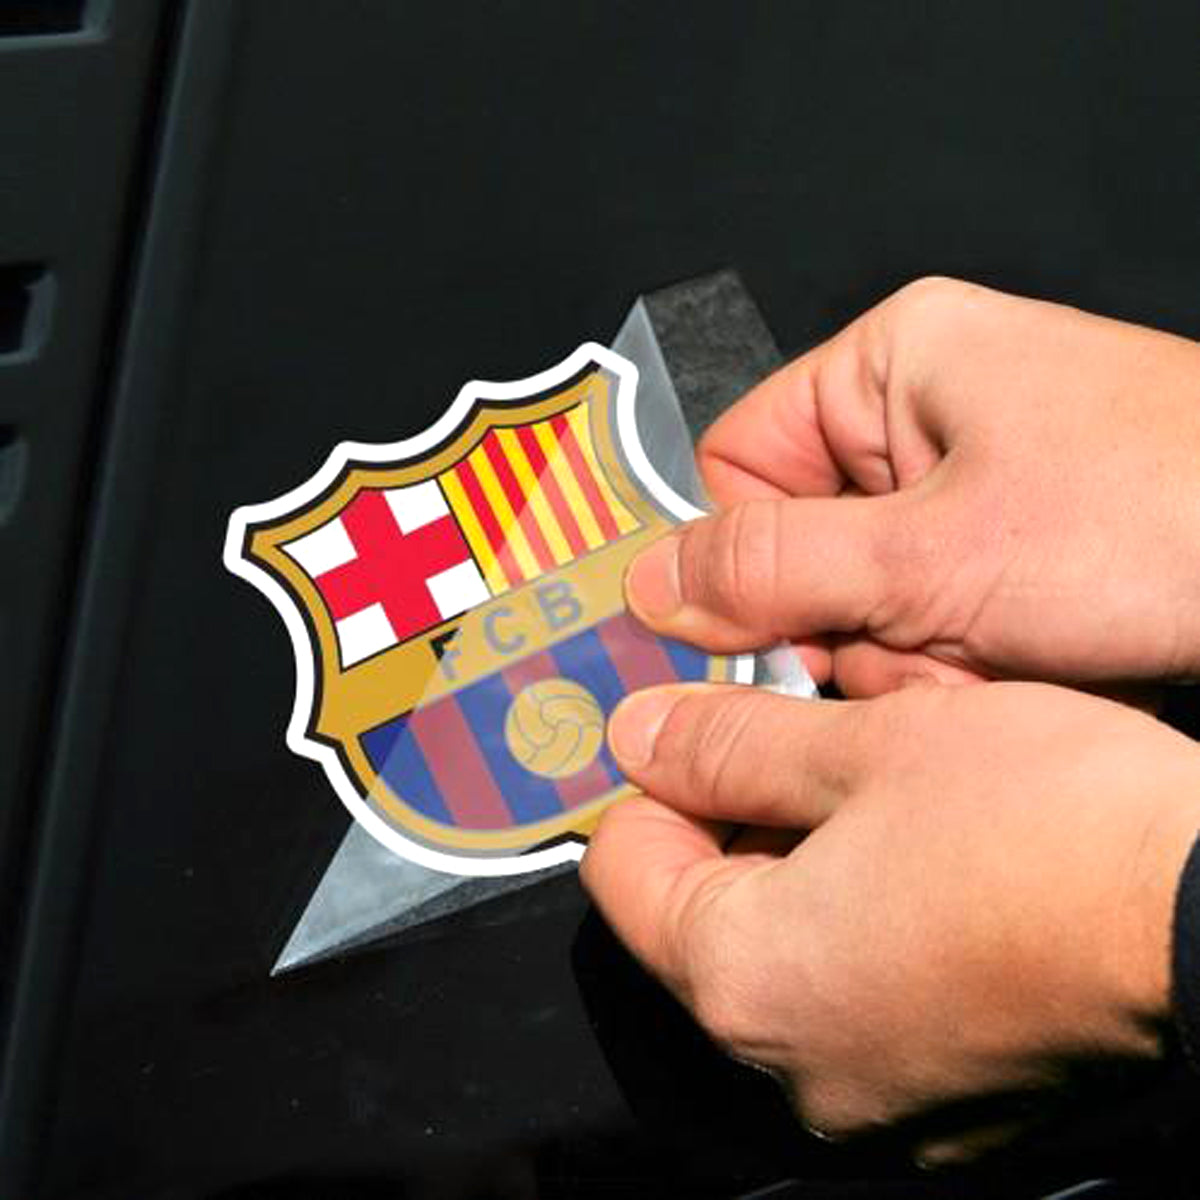 FC Barcelona Perfect Decal Set of two 4"x4"